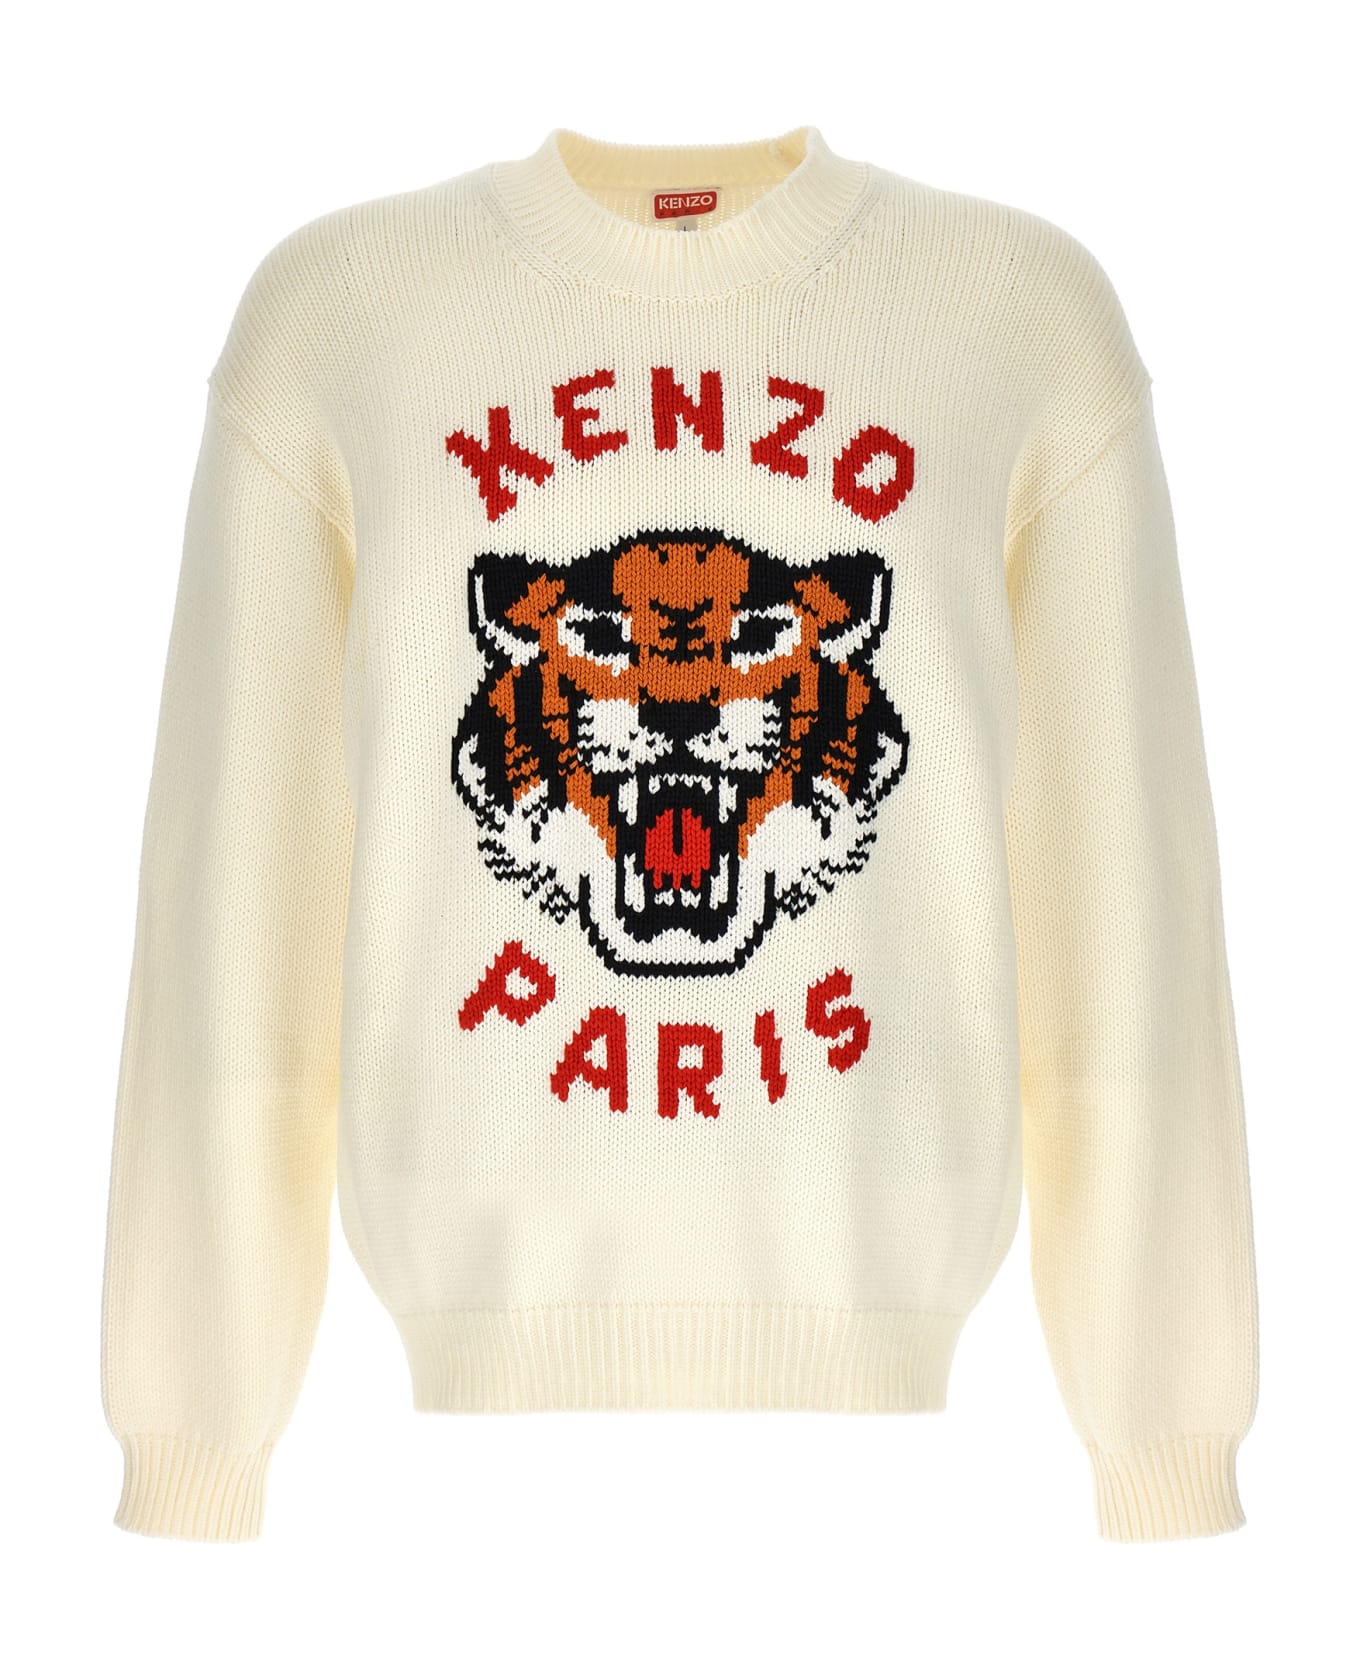 Kenzo 'lucky Tiger' Sweater - White